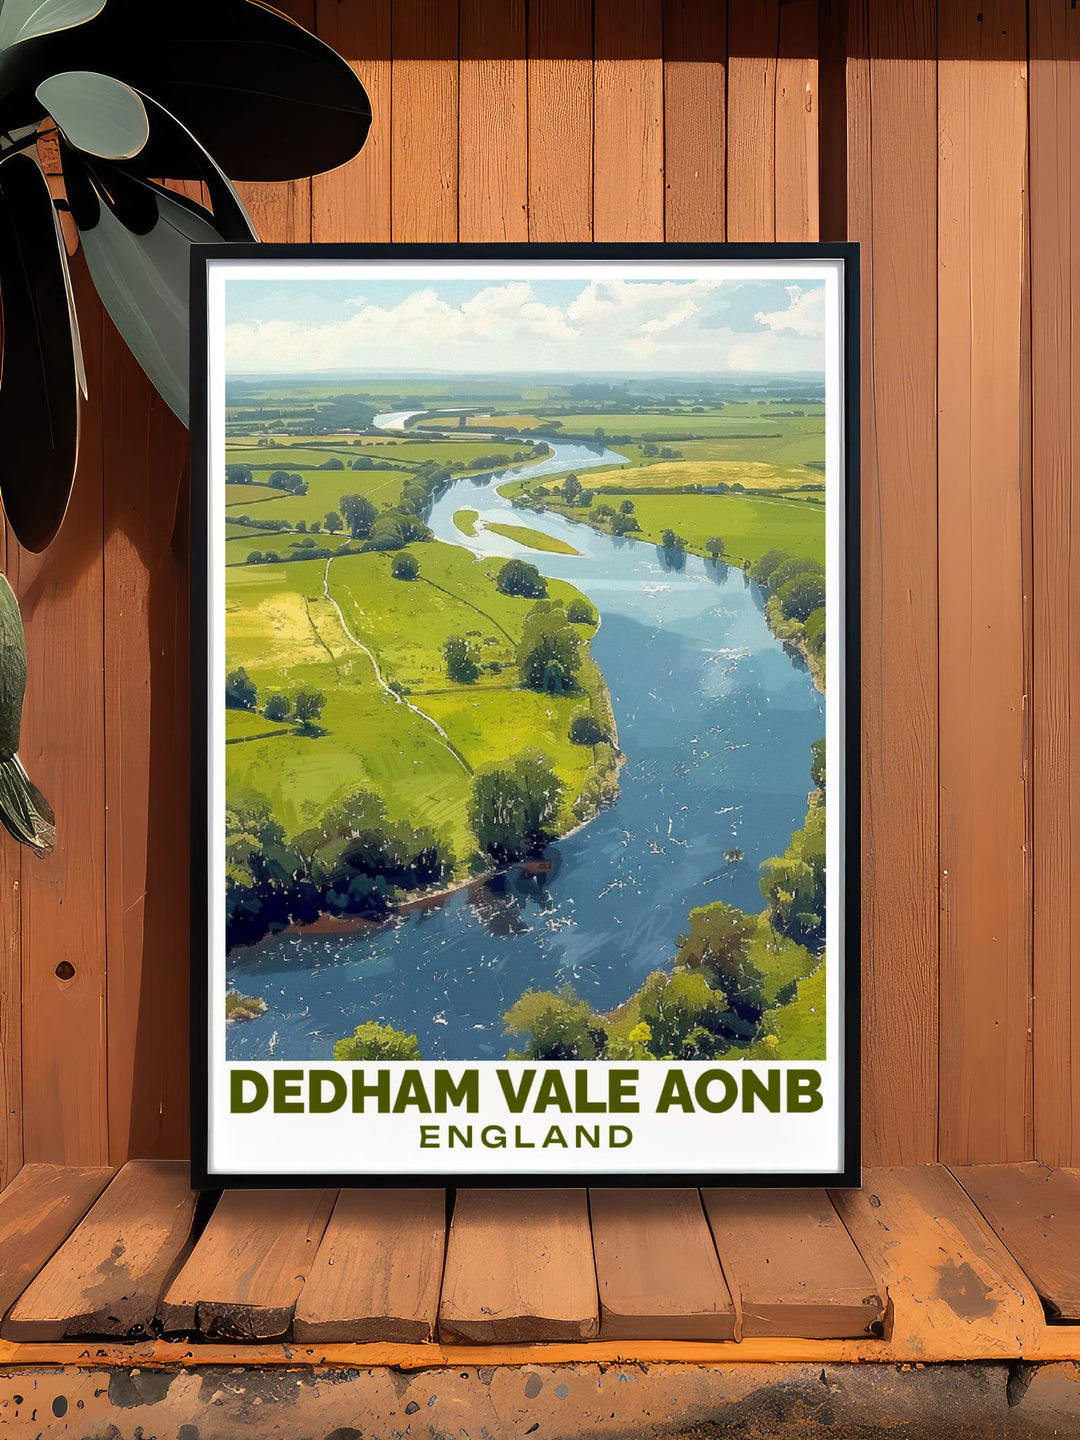 Modern wall decor showcasing the picturesque landscapes of Dedham Vale, perfect for bringing a sense of tranquility and nature into your home.